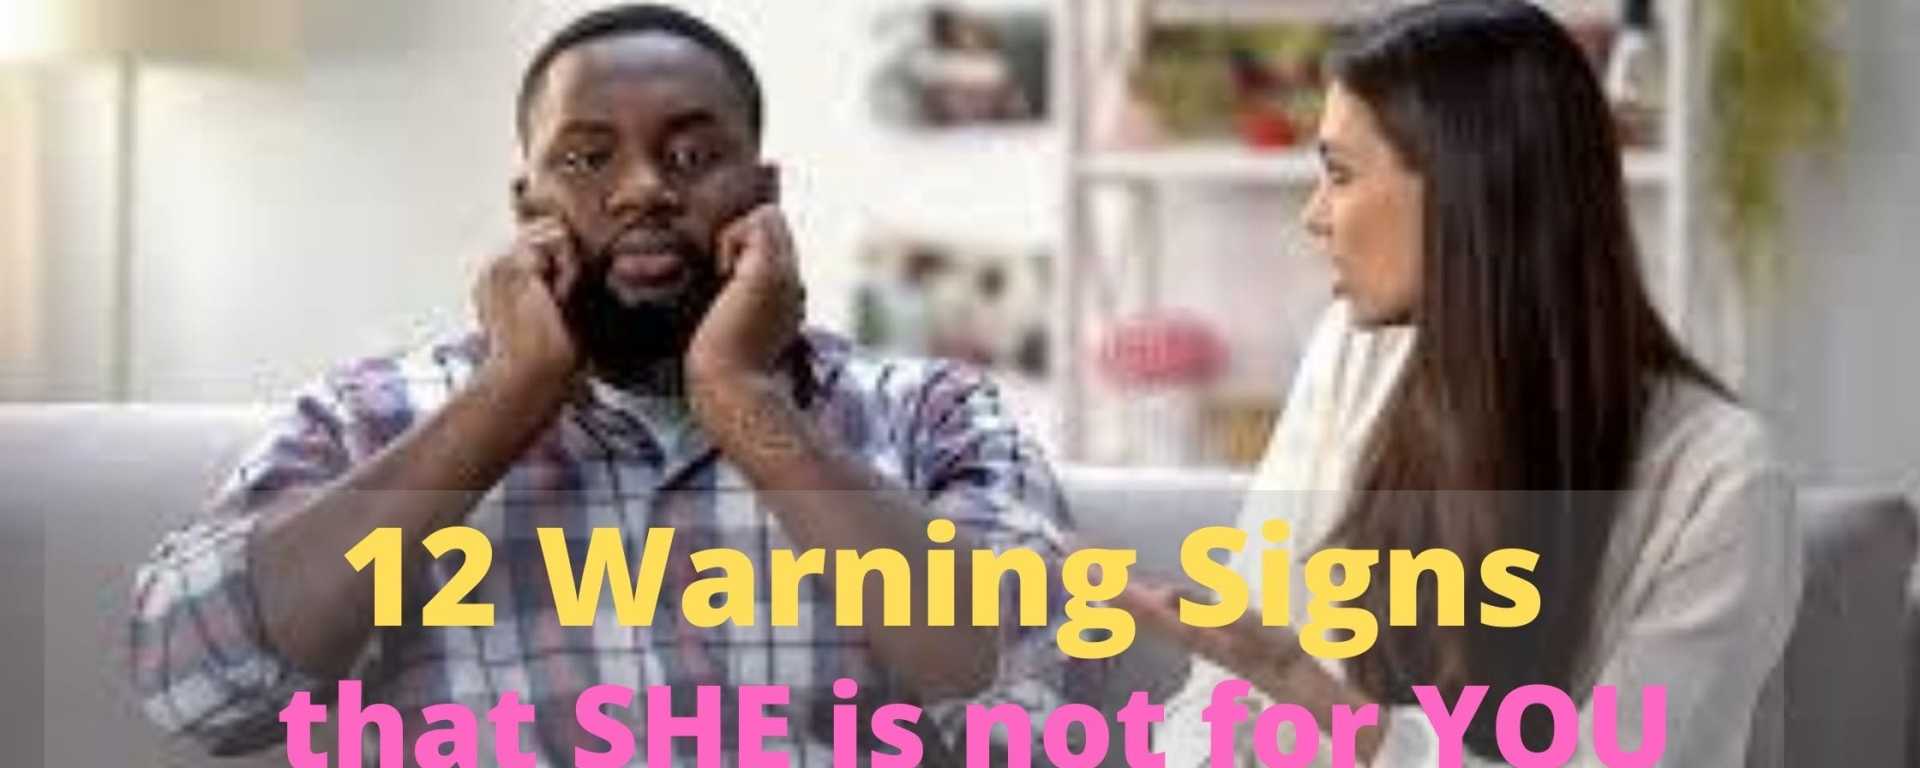 Relationship Red flag-Warning signs for guys